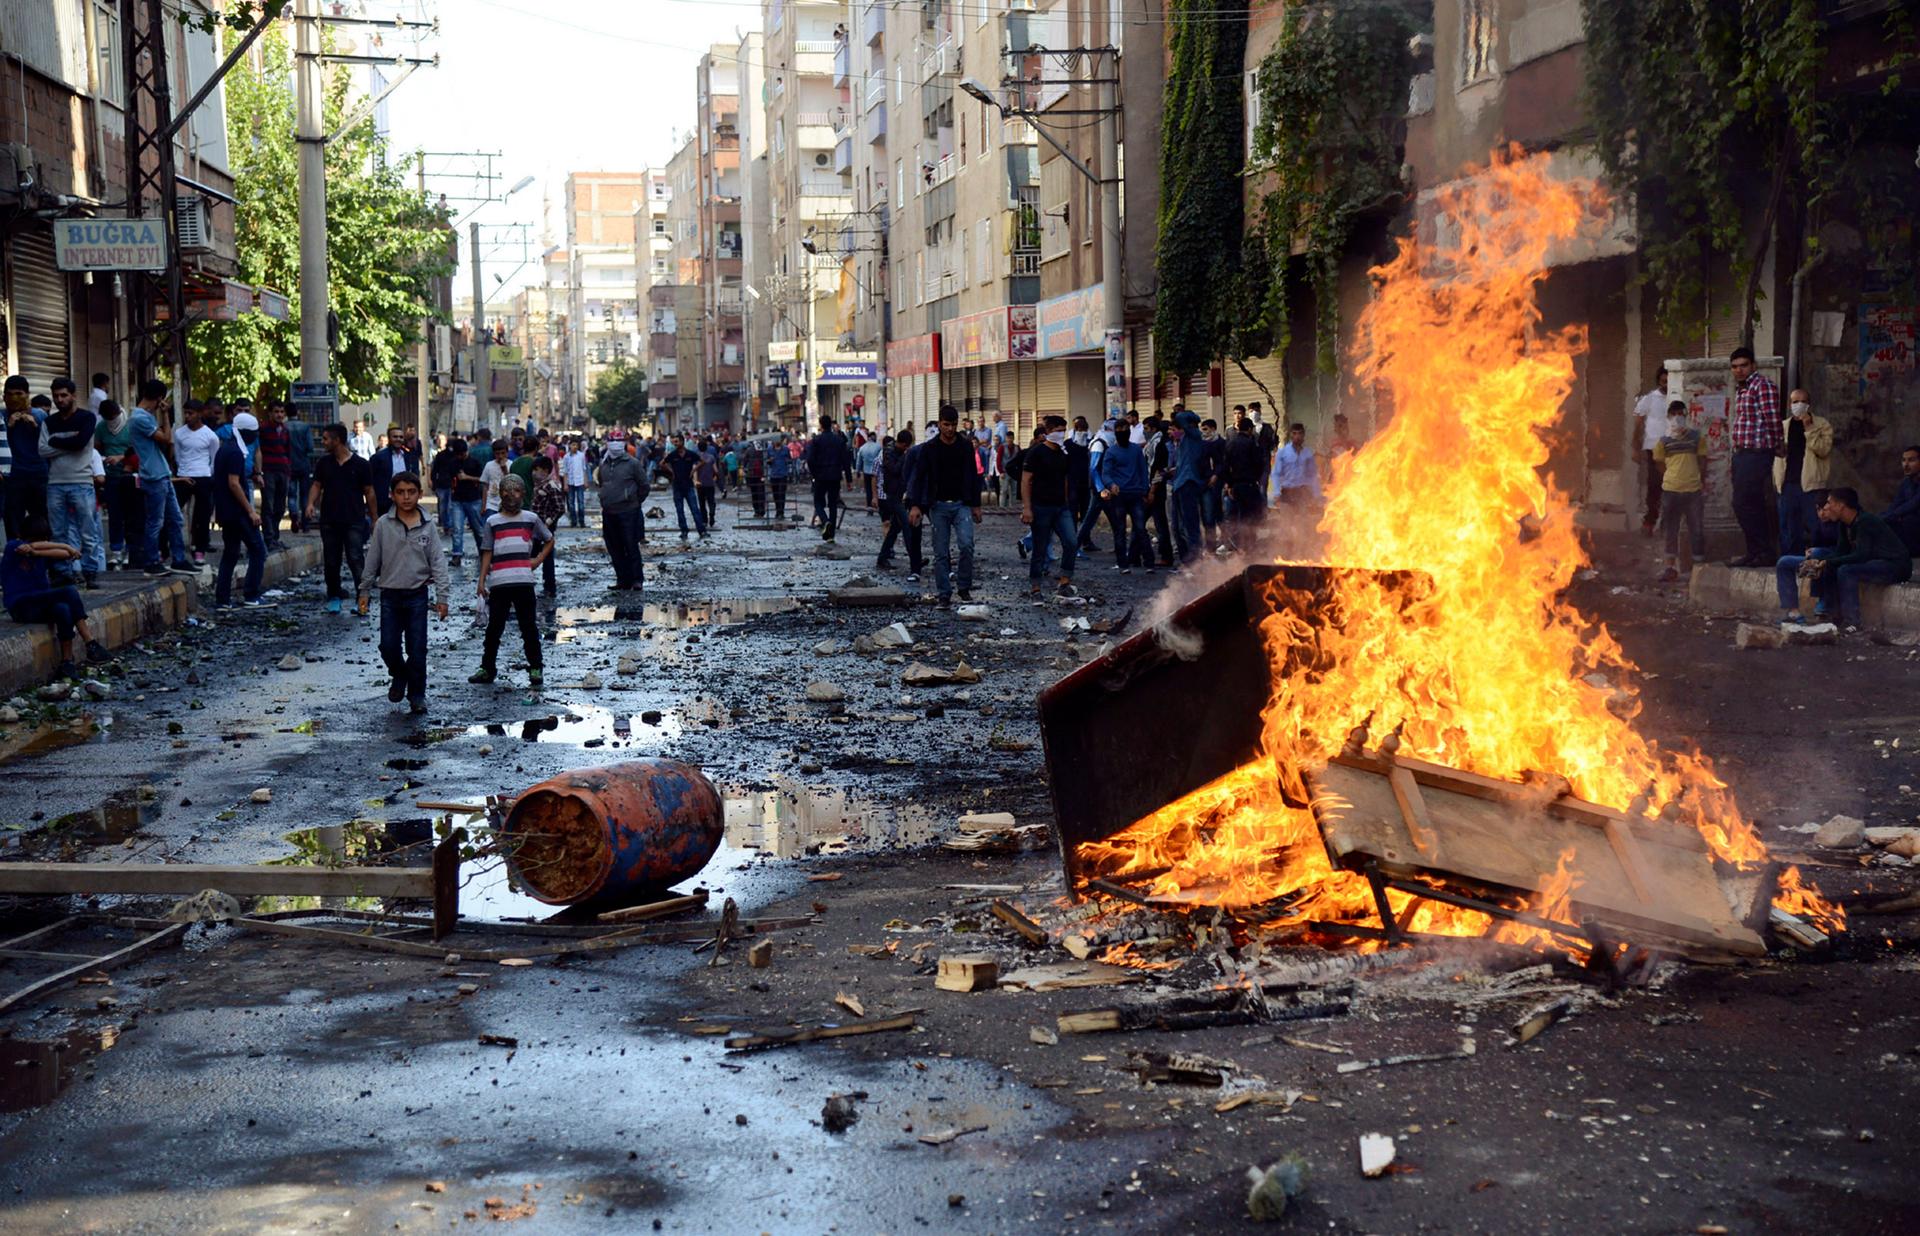 Kurdish protesters set fire to a barricade blocking the street as they clash with riot police in Diyarbakir, Turkey, on October 7, 2014.